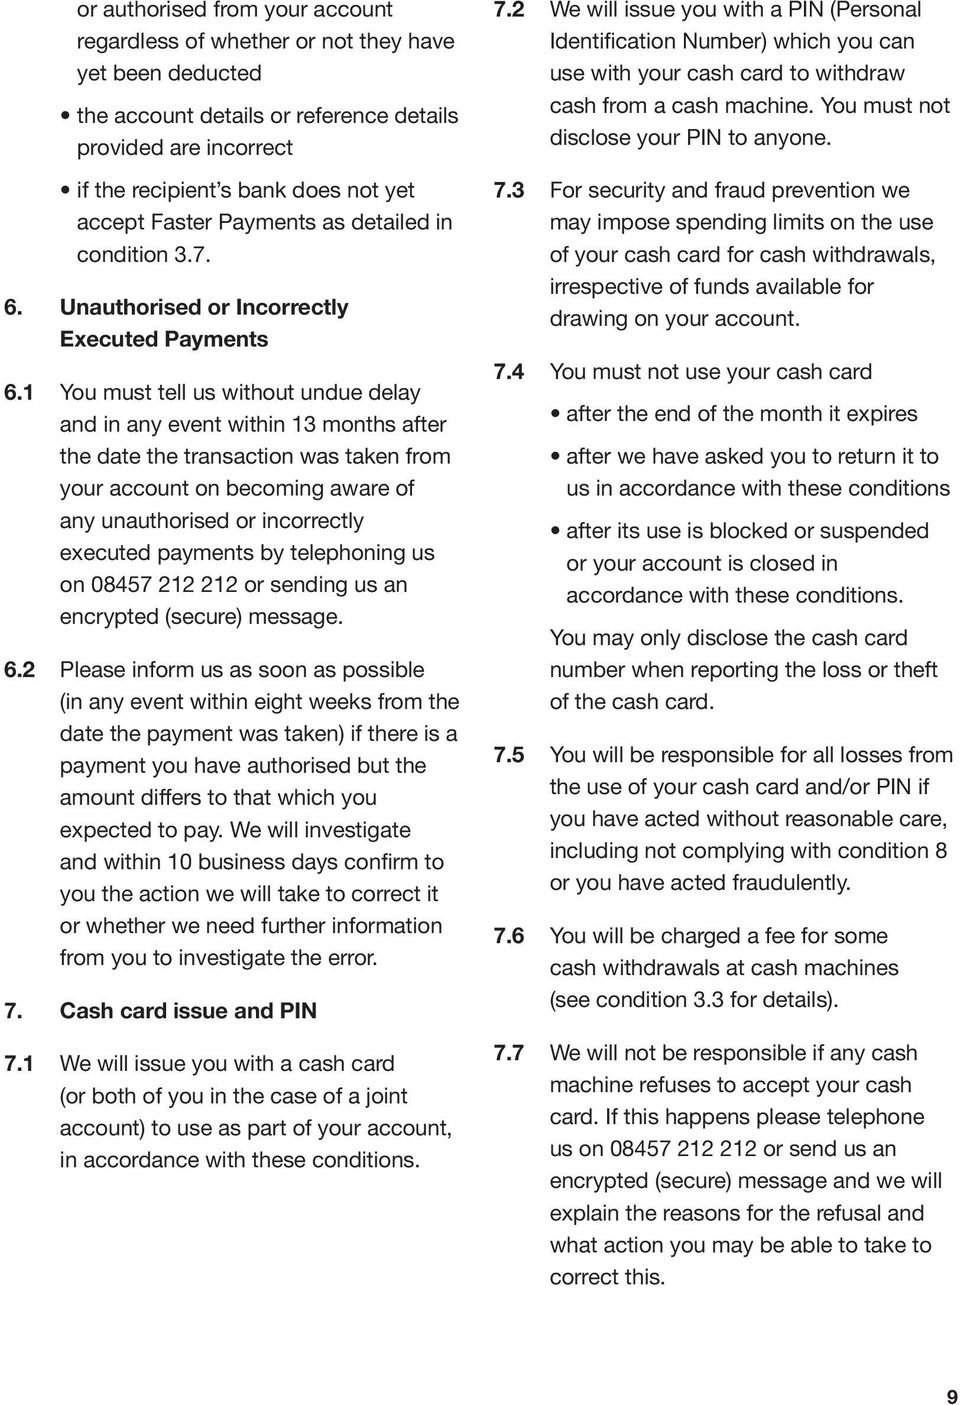 1 You must tell us without undue delay and in any event within 13 months after the date the transaction was taken from your account on becoming aware of any unauthorised or incorrectly executed